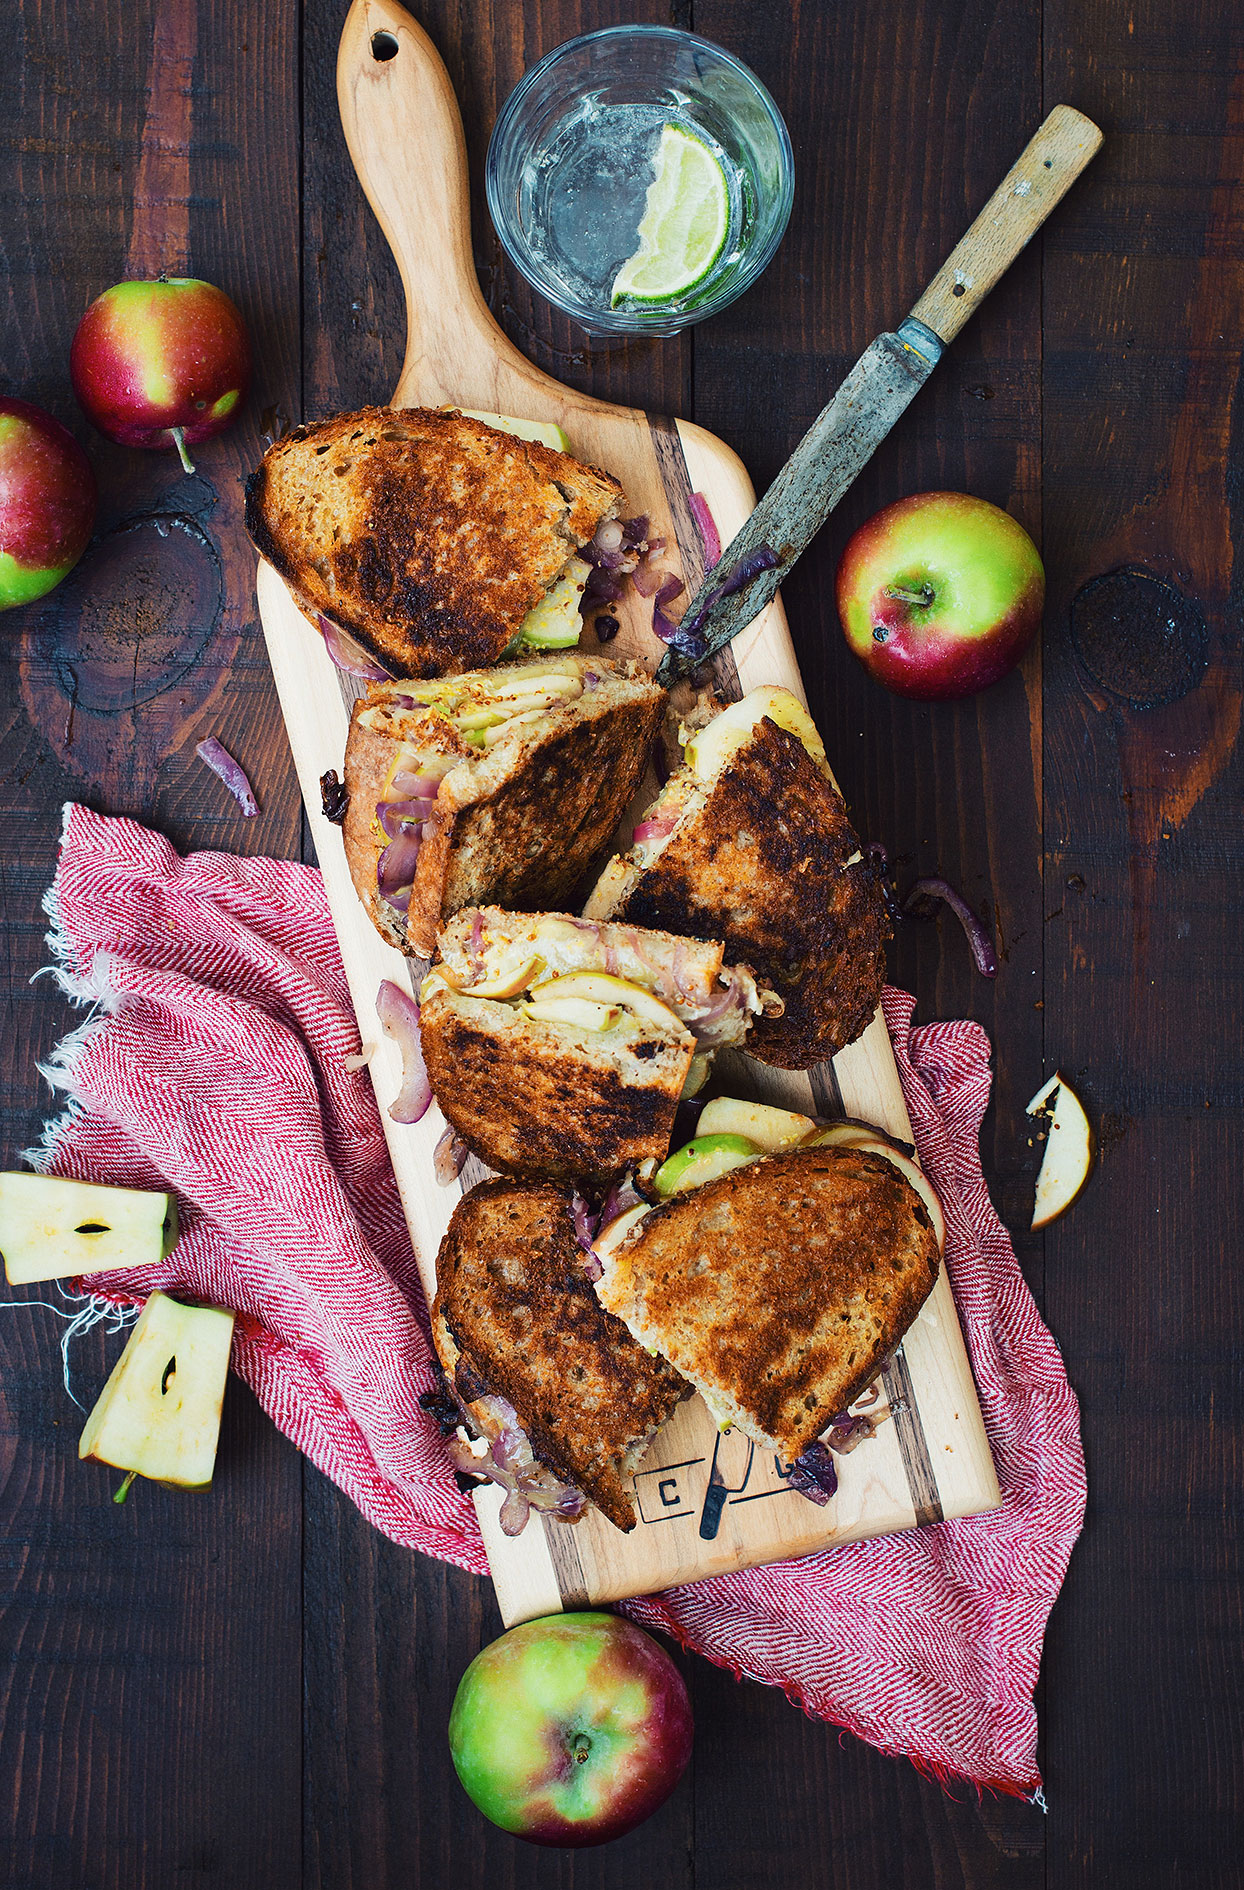 Grilled cheese with apples, Perron Cheddar and caramelized onions